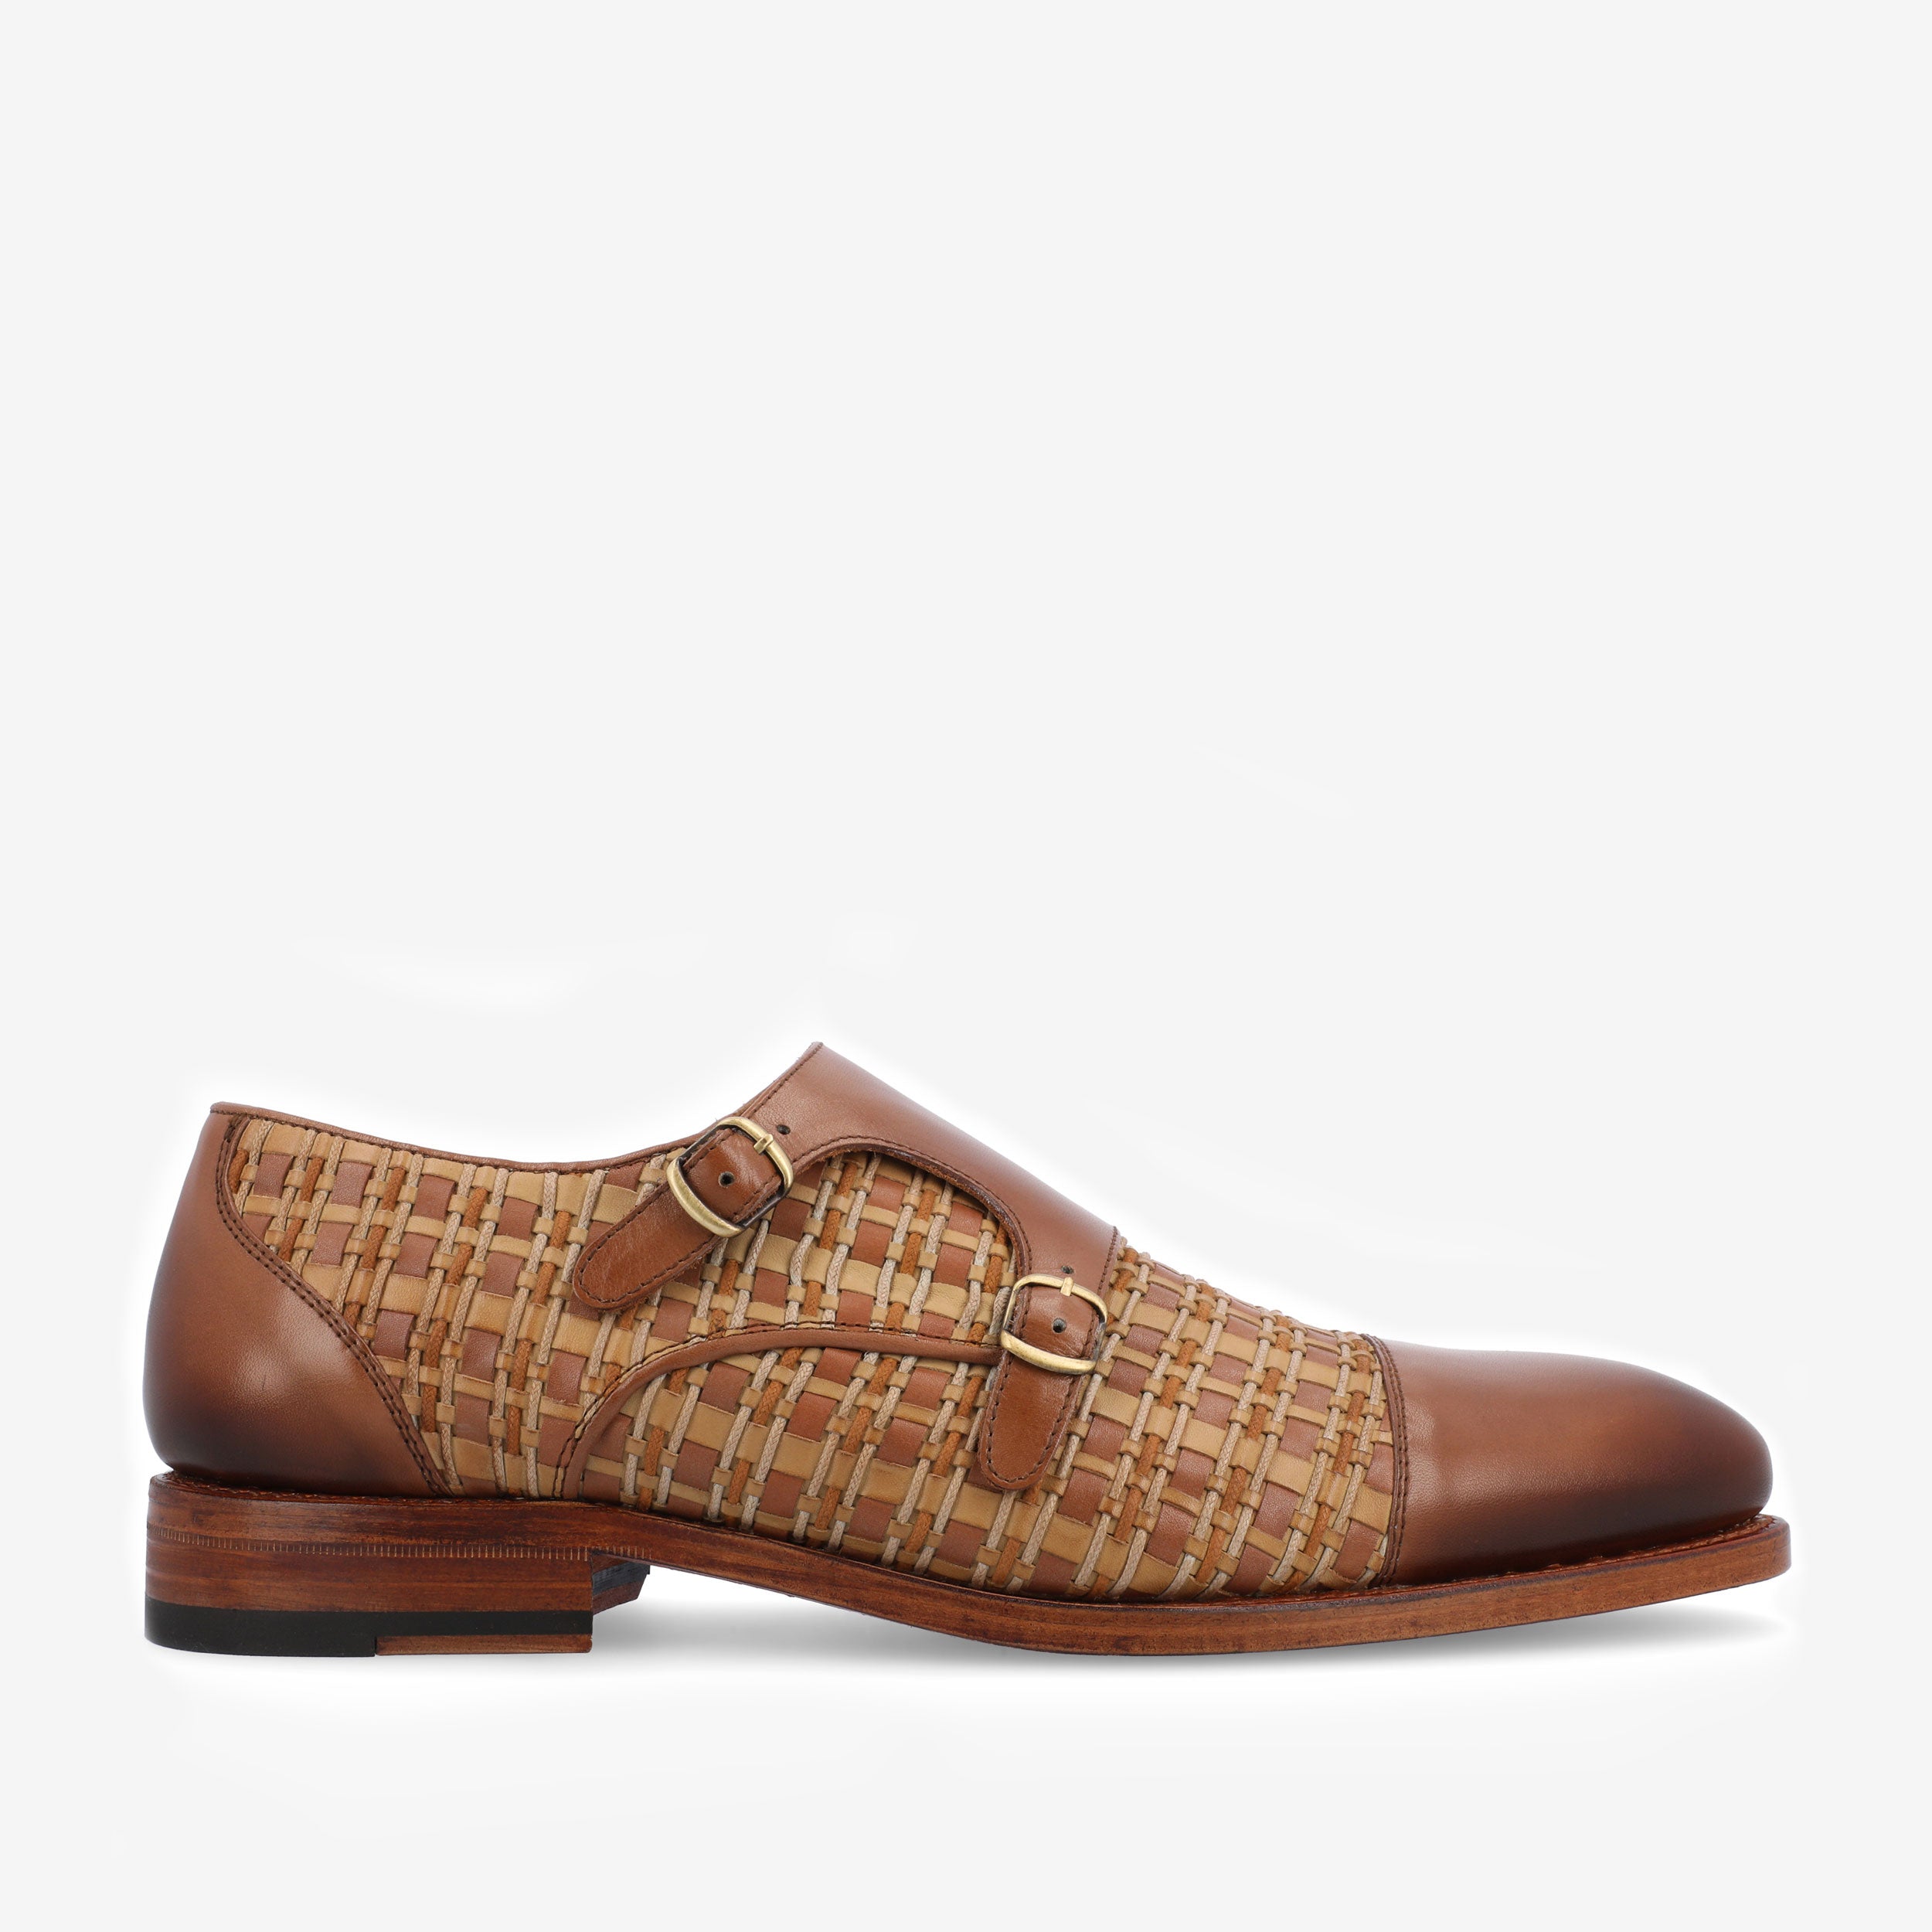 The Lucca Monk Strap Shoe in Brown Woven | TAFT